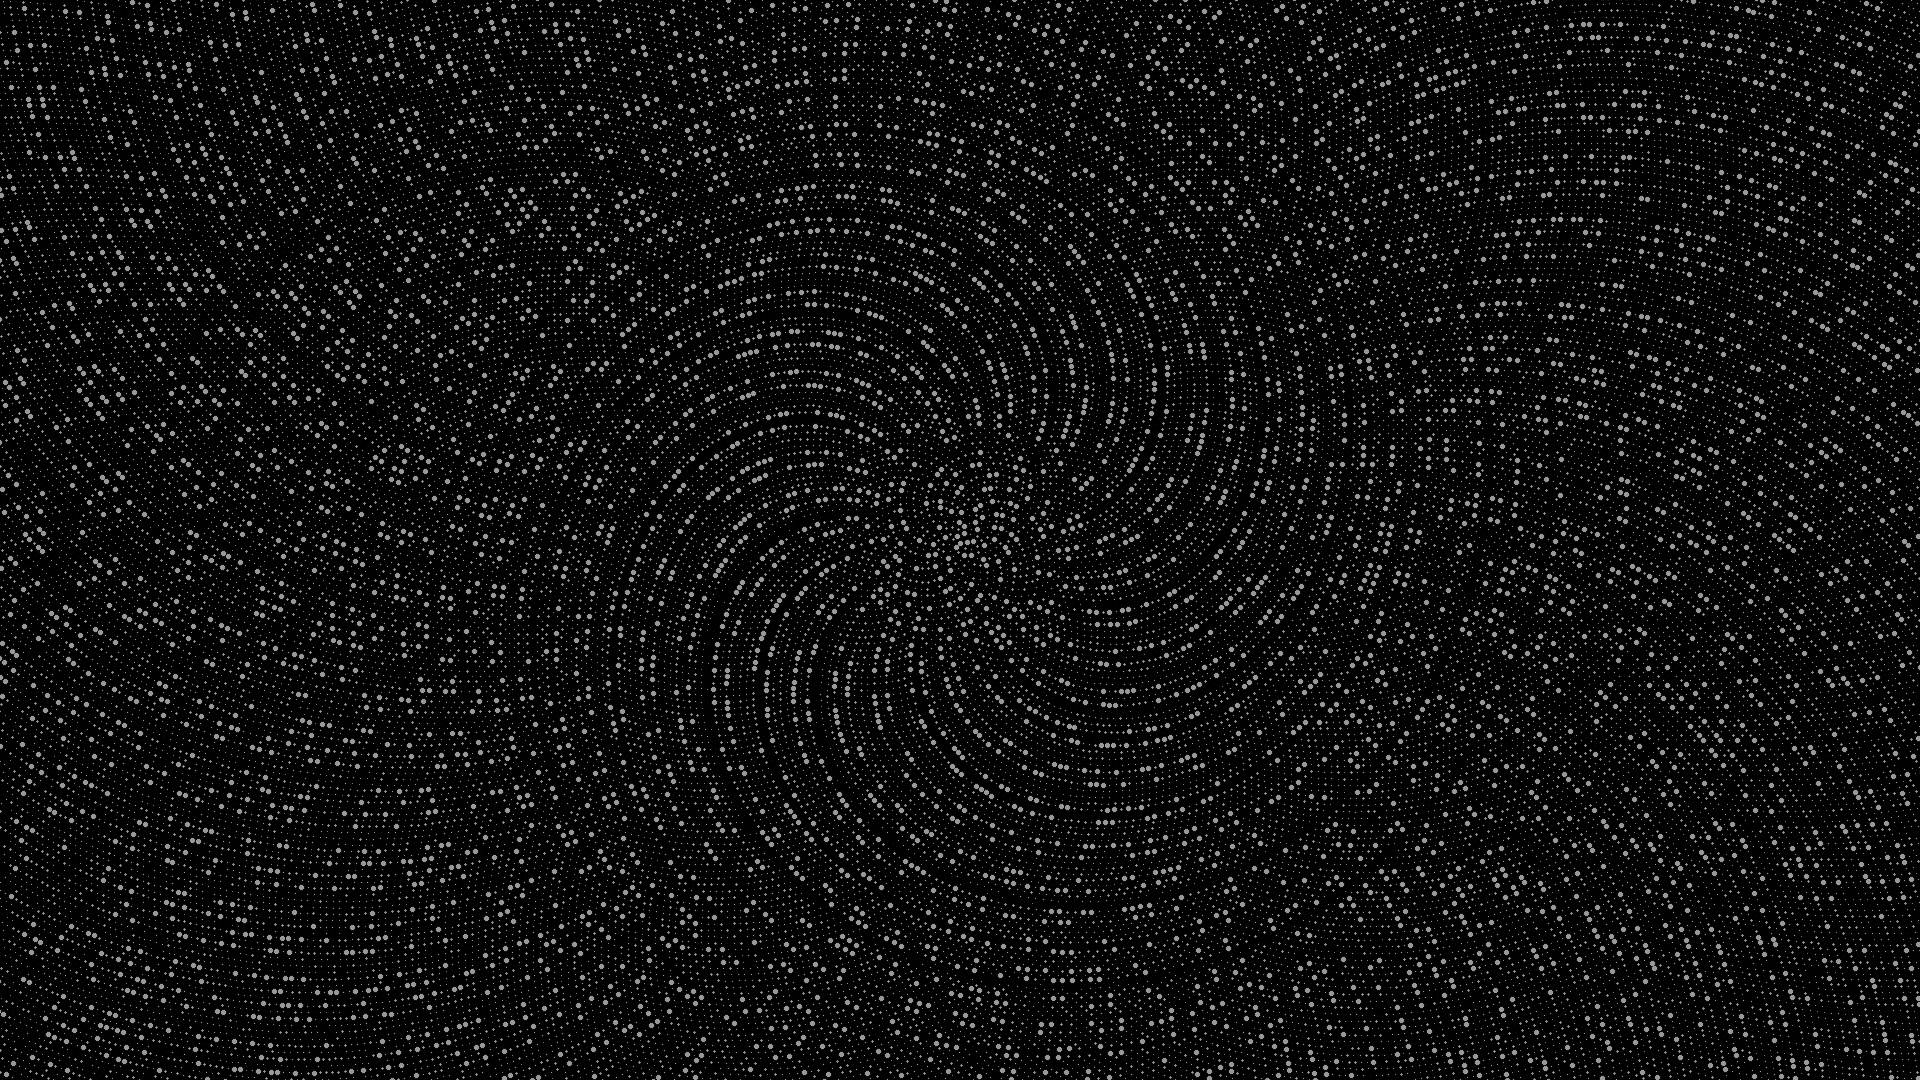 Golden Ratio: Monochrome pattern, Dots, Divine proportions, Spiral, Symmetry section, Black and white. 1920x1080 Full HD Background.